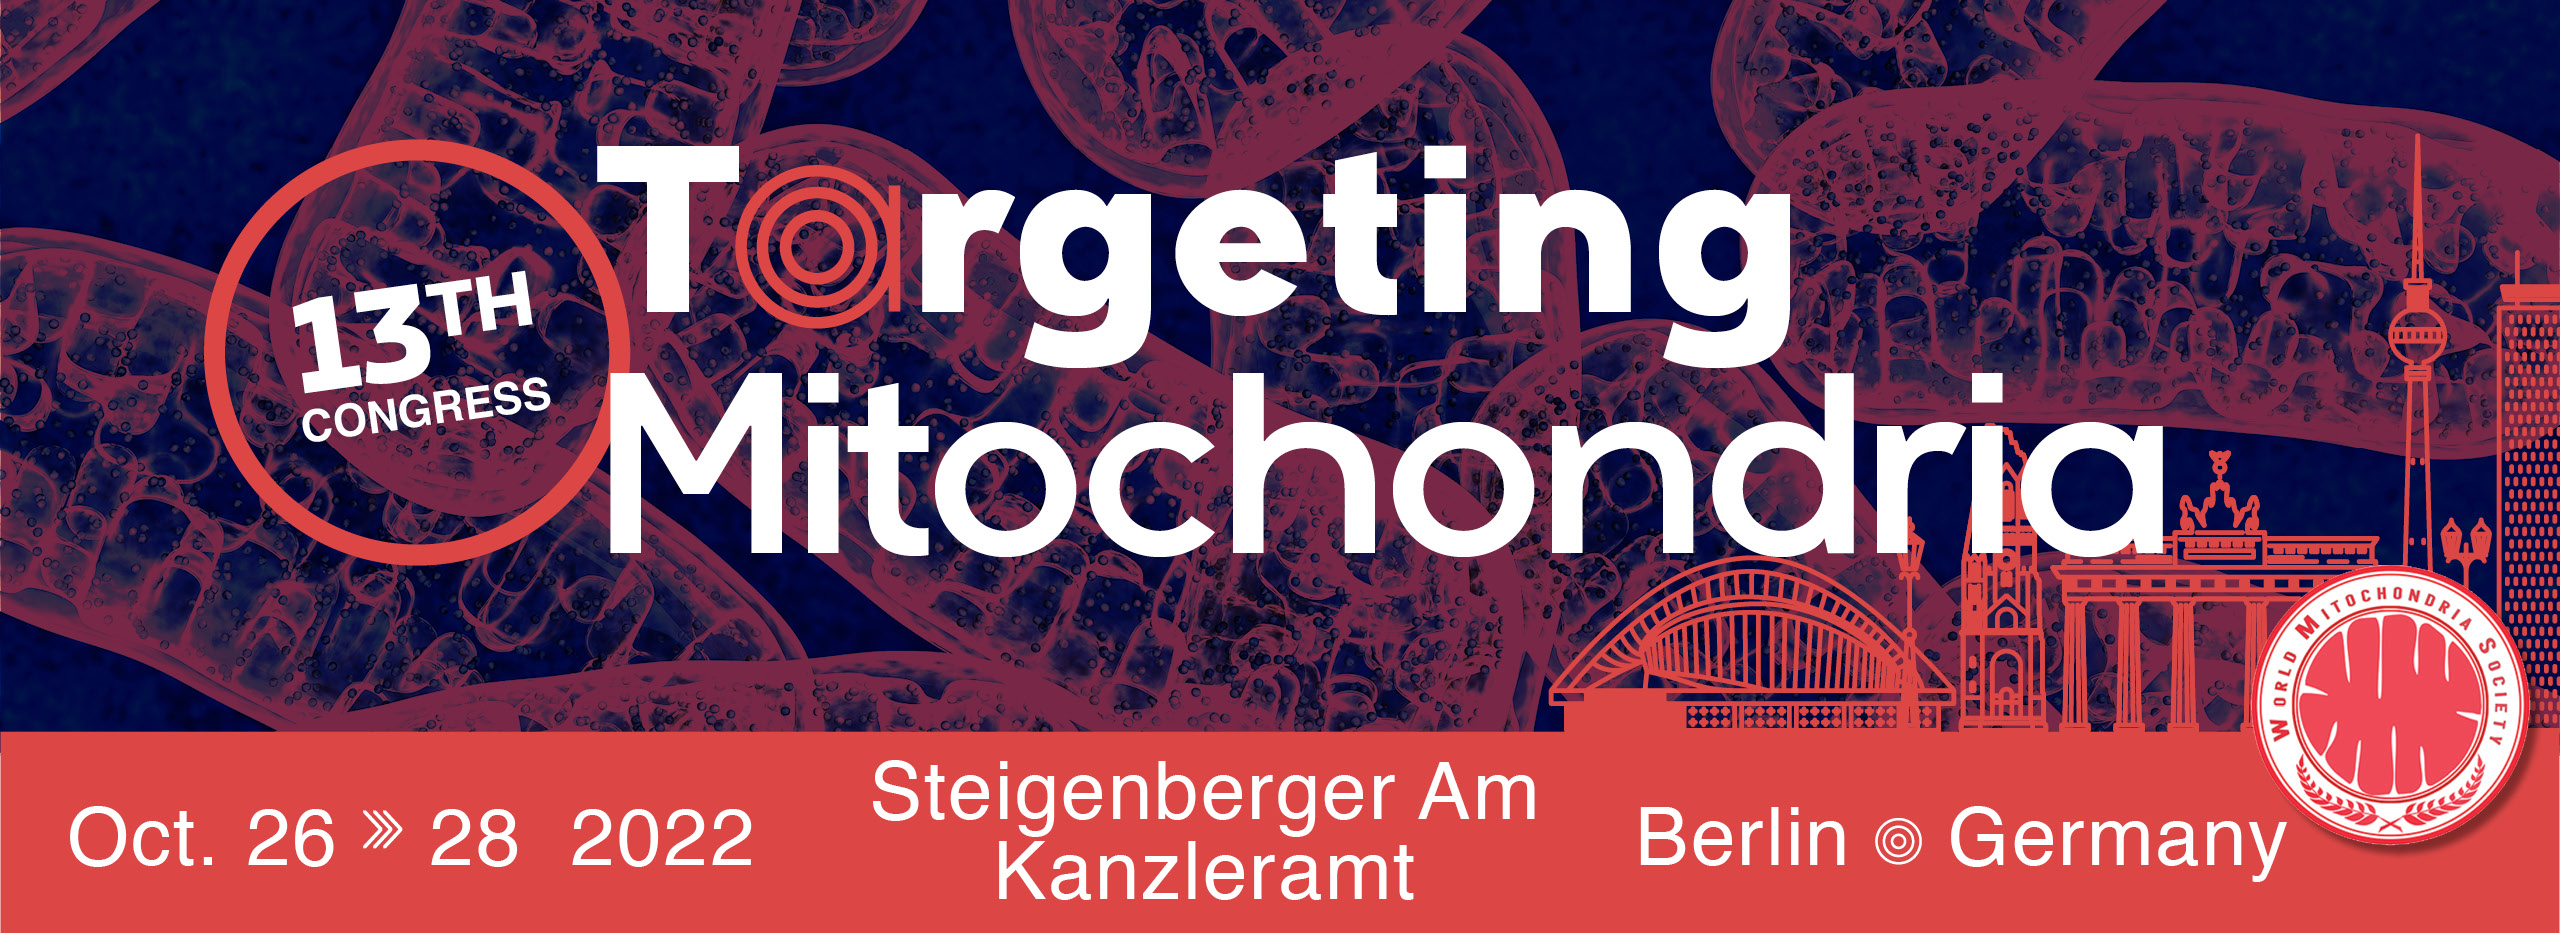 12h World Congress on Targeting Mitochondria | October 28-29, 2021 | Berlin, Germany 